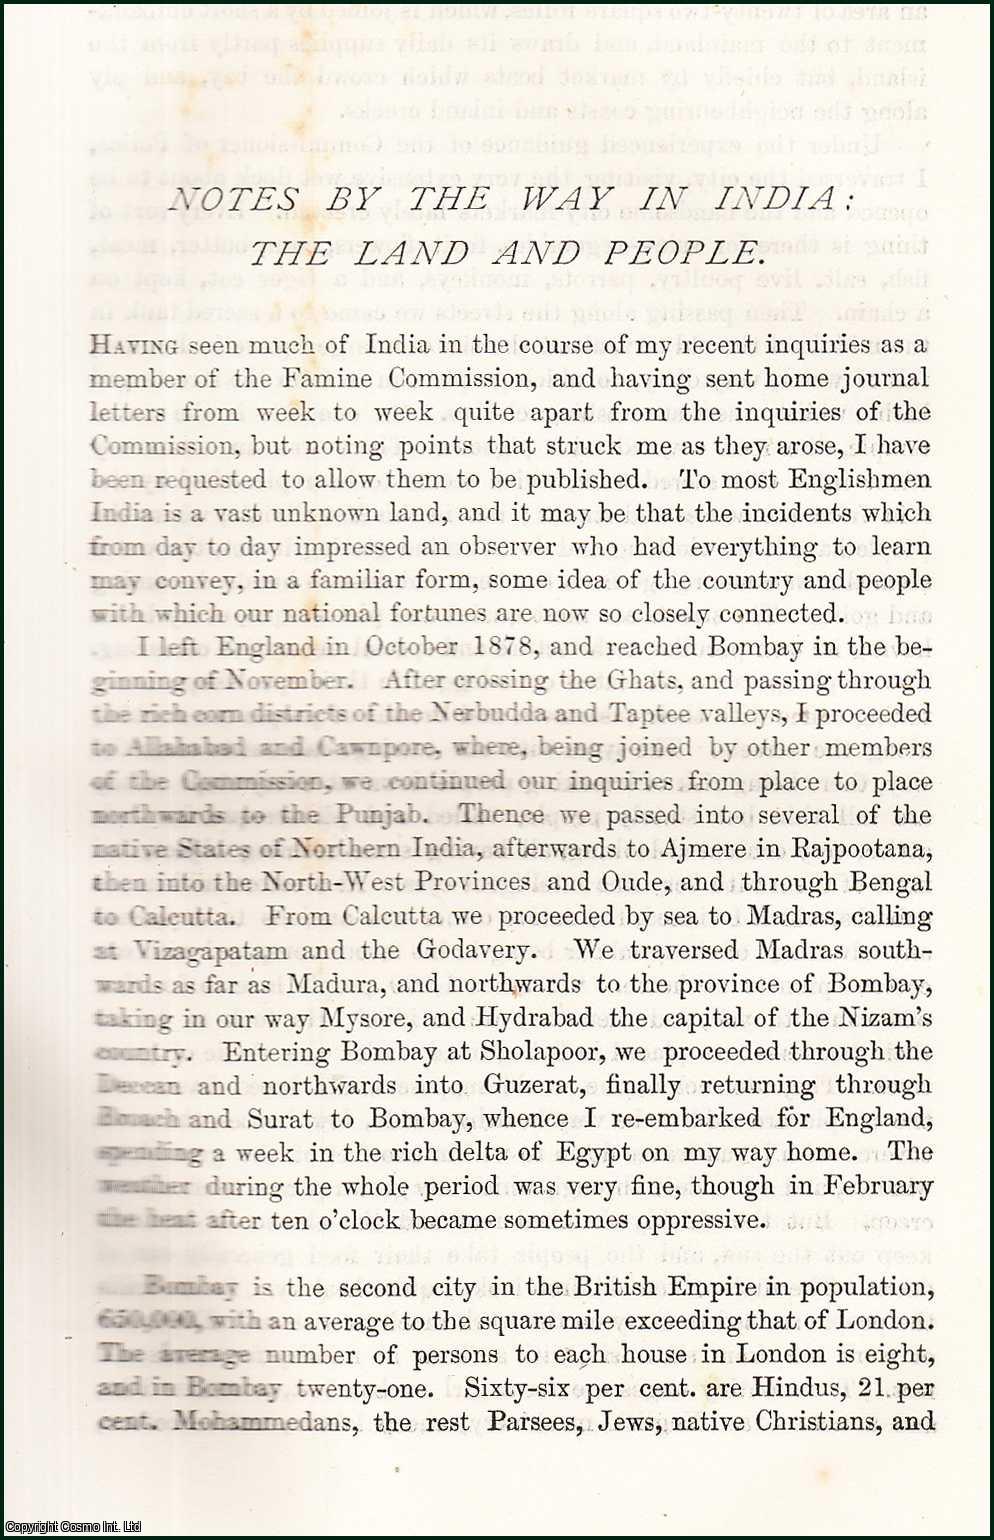 James Caird - Notes by the way in India : The Land and People. A complete 4 part original article from the Nineteenth Century Magazine, 1879.